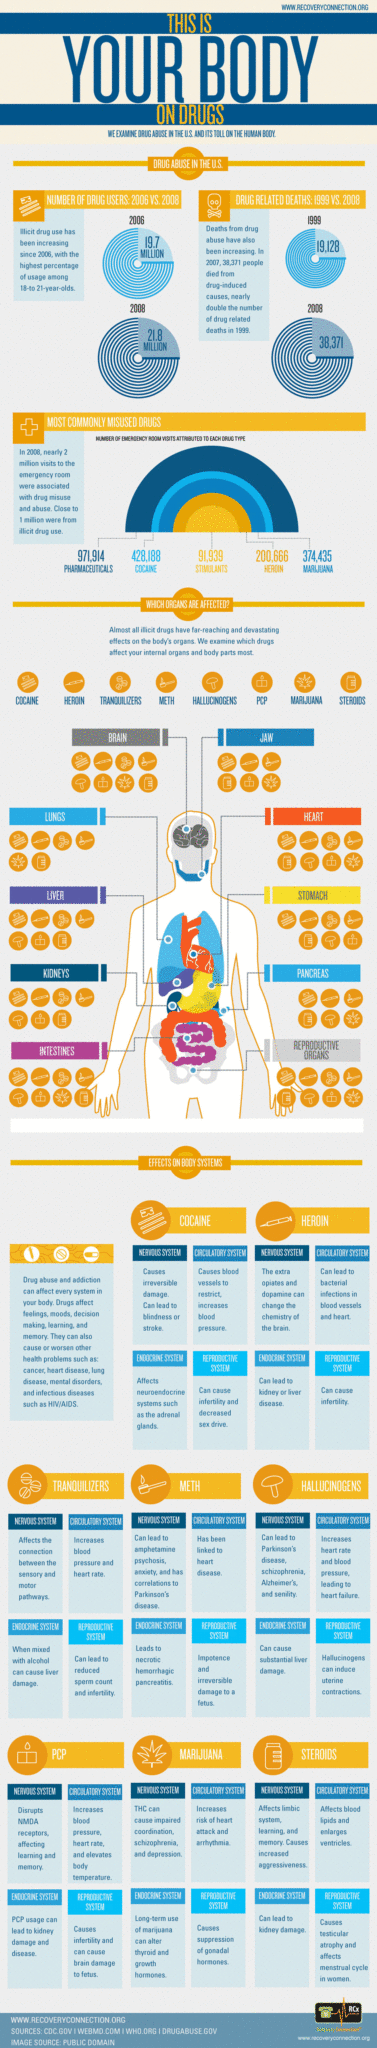 Drug-Abuse-and-Your-Body-Exposed-Infographic